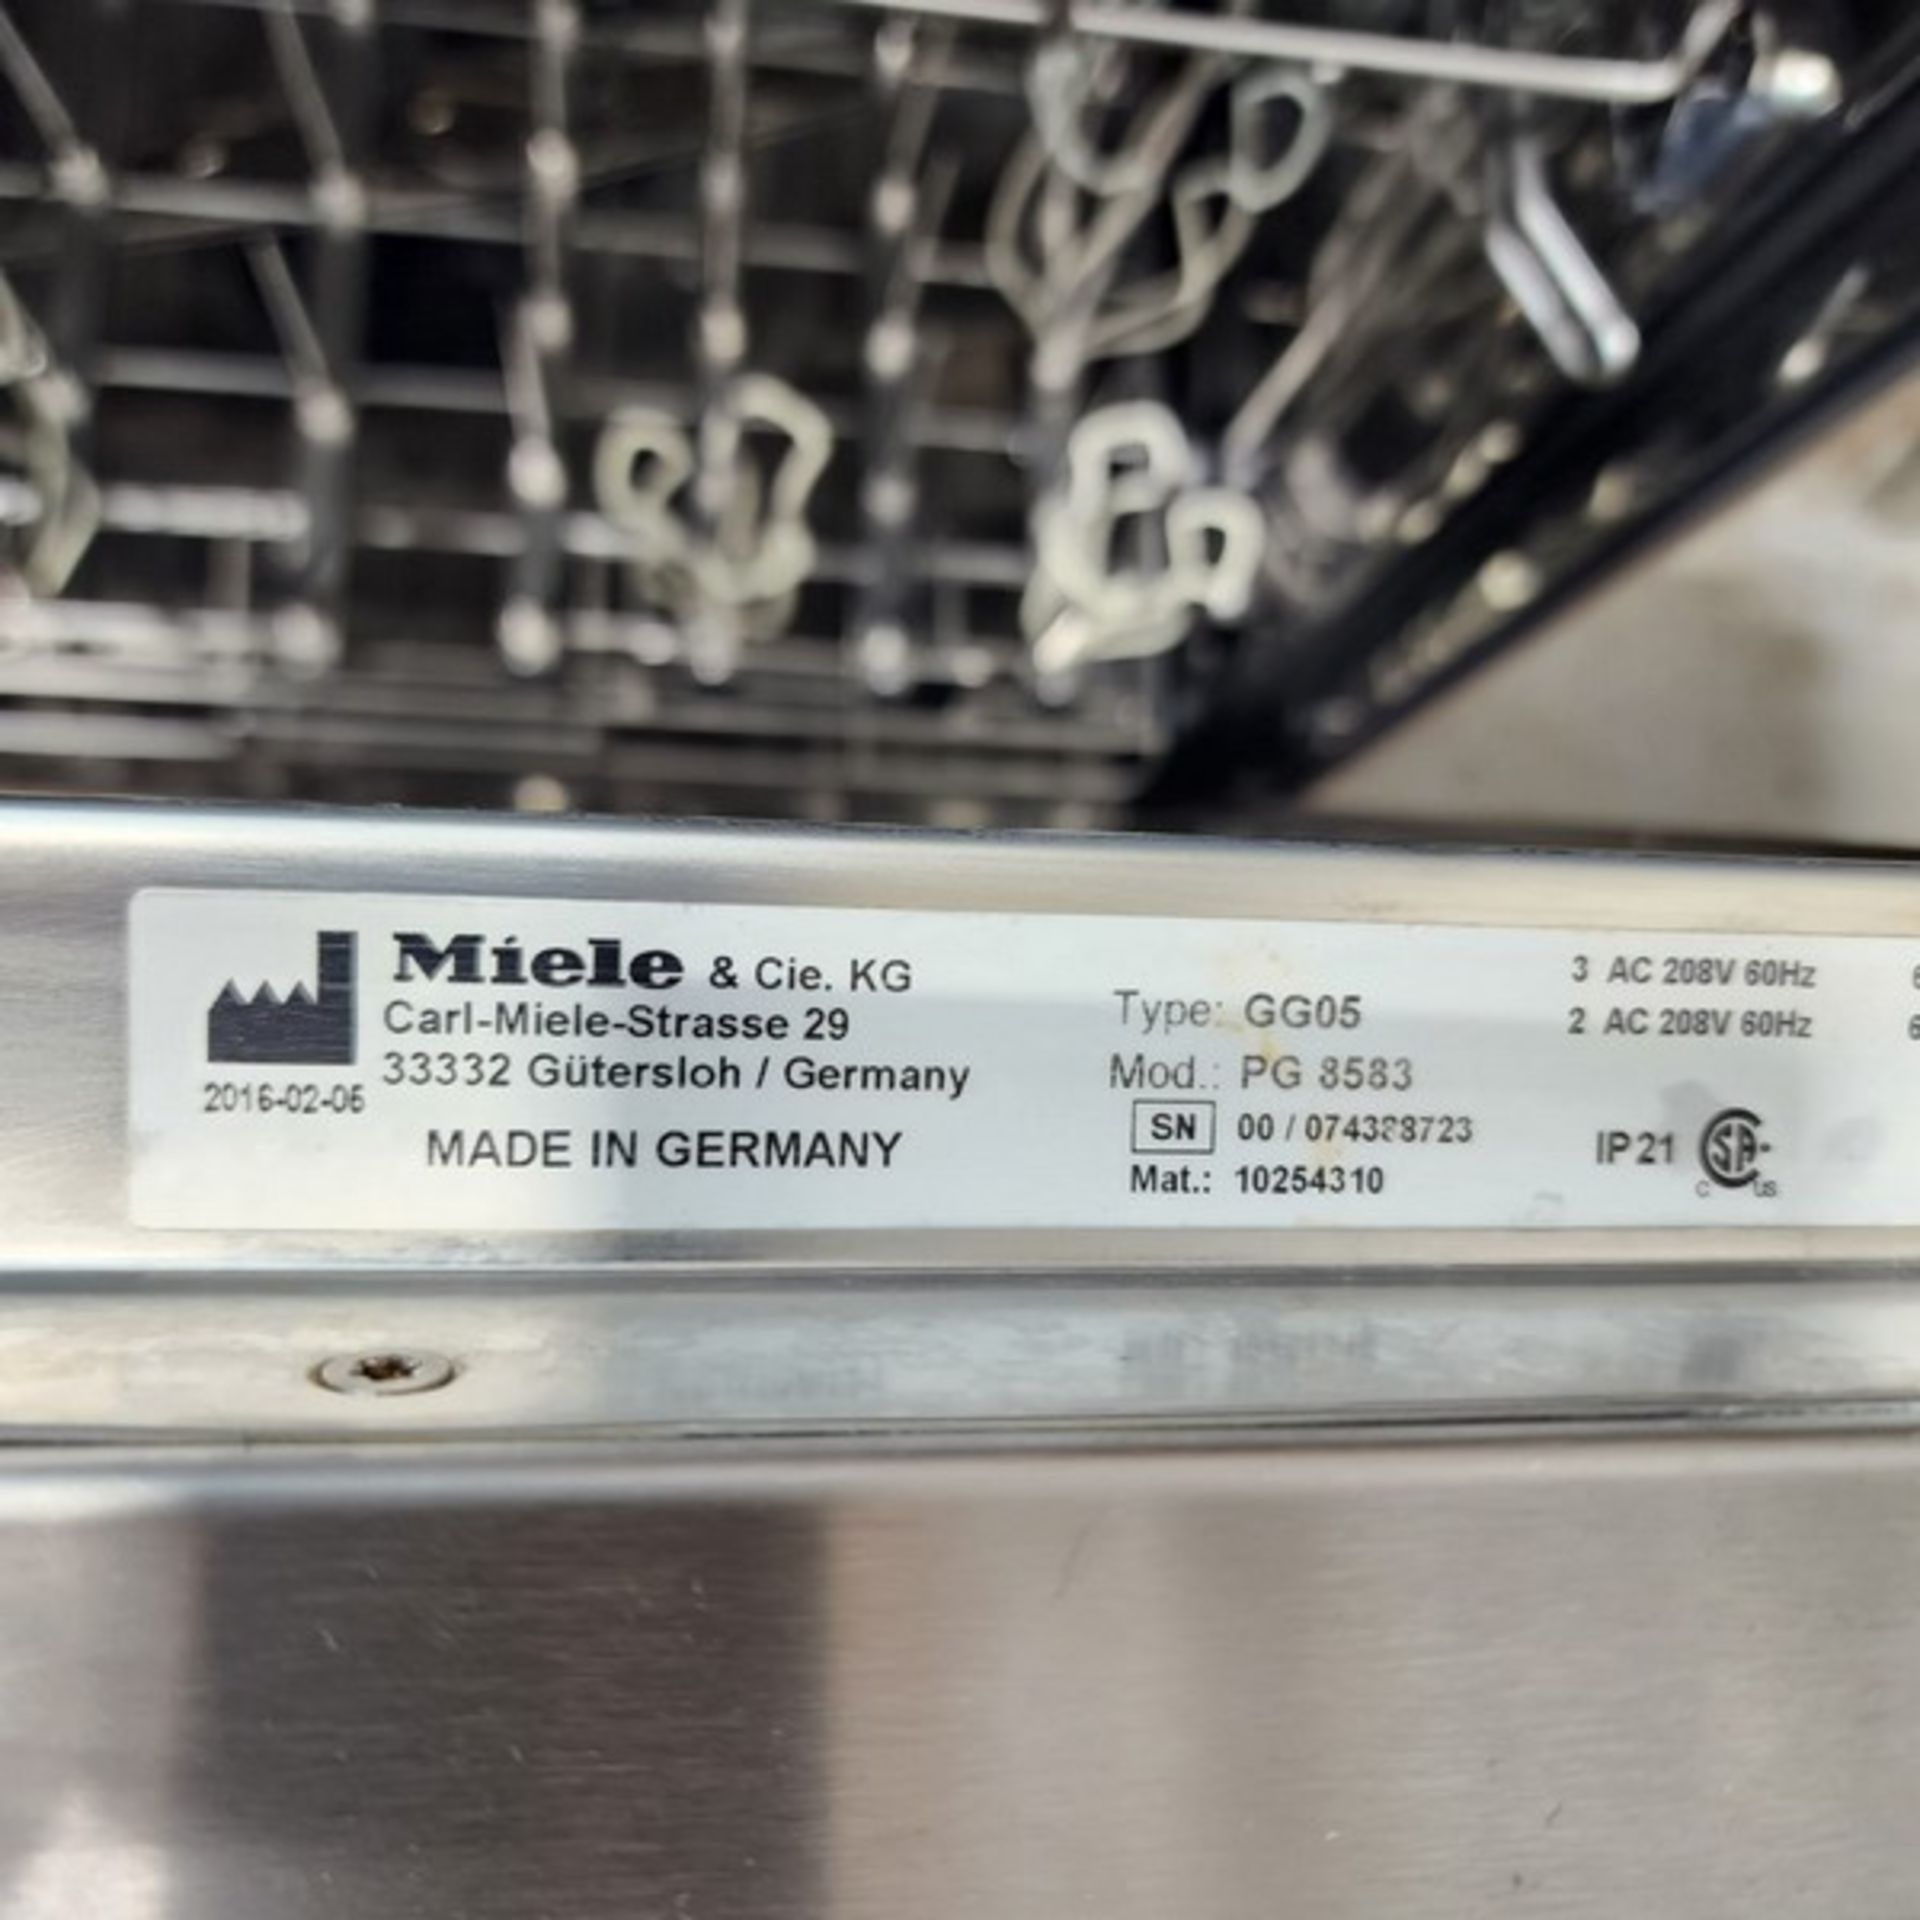 Miele Commercial Dishwasher high-quality Model PG 8583. Electric specifications: 208 volts, 60hz, - Bild 7 aus 7